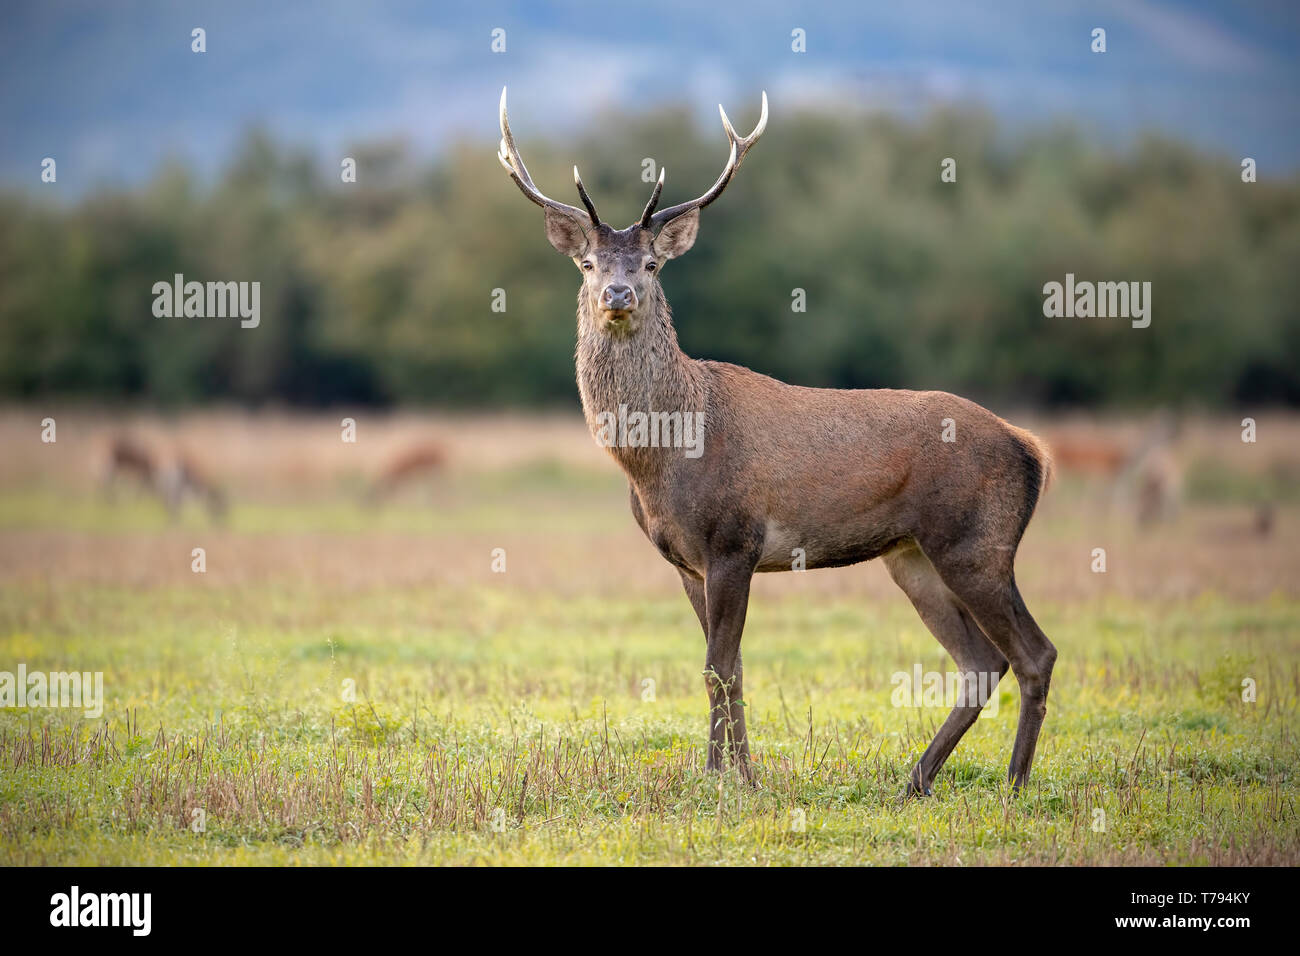 Young red deer, cervus elaphus, stag in autumn watching with rest of herd in background. Wild animal in nature. Stock Photo